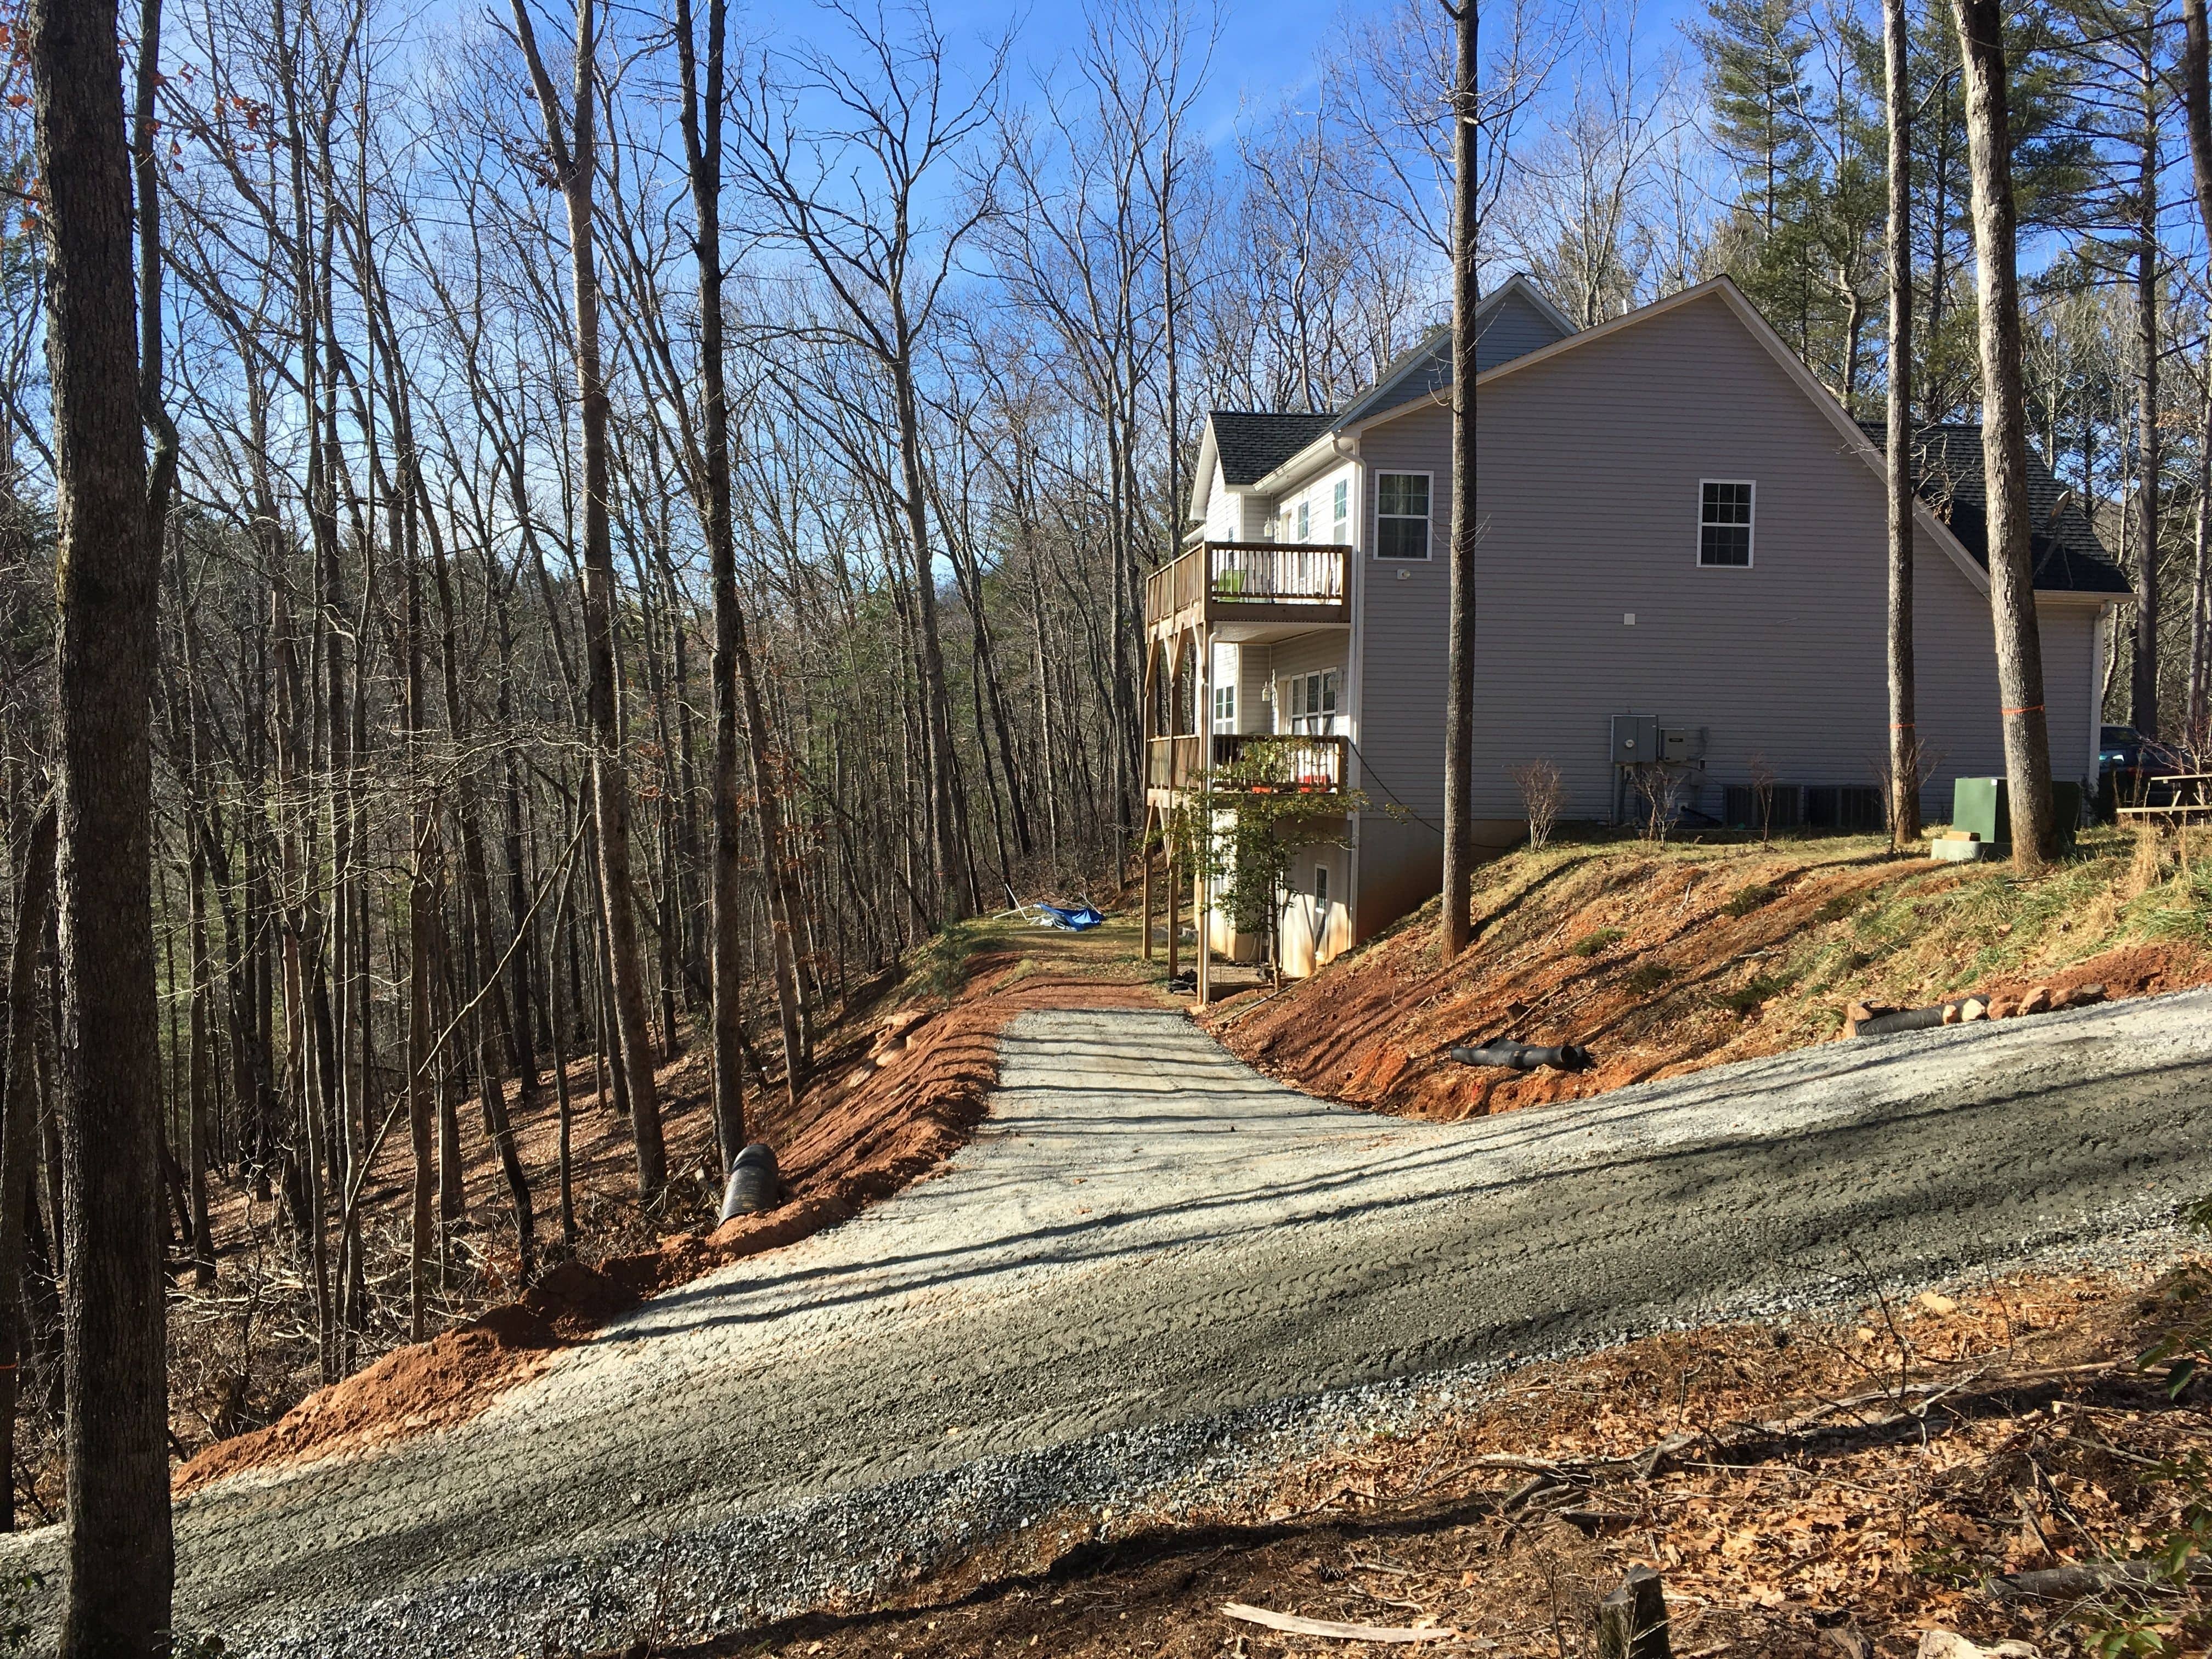 New driveway installed. Drainage pipes, ditches, underlayment, and gravel